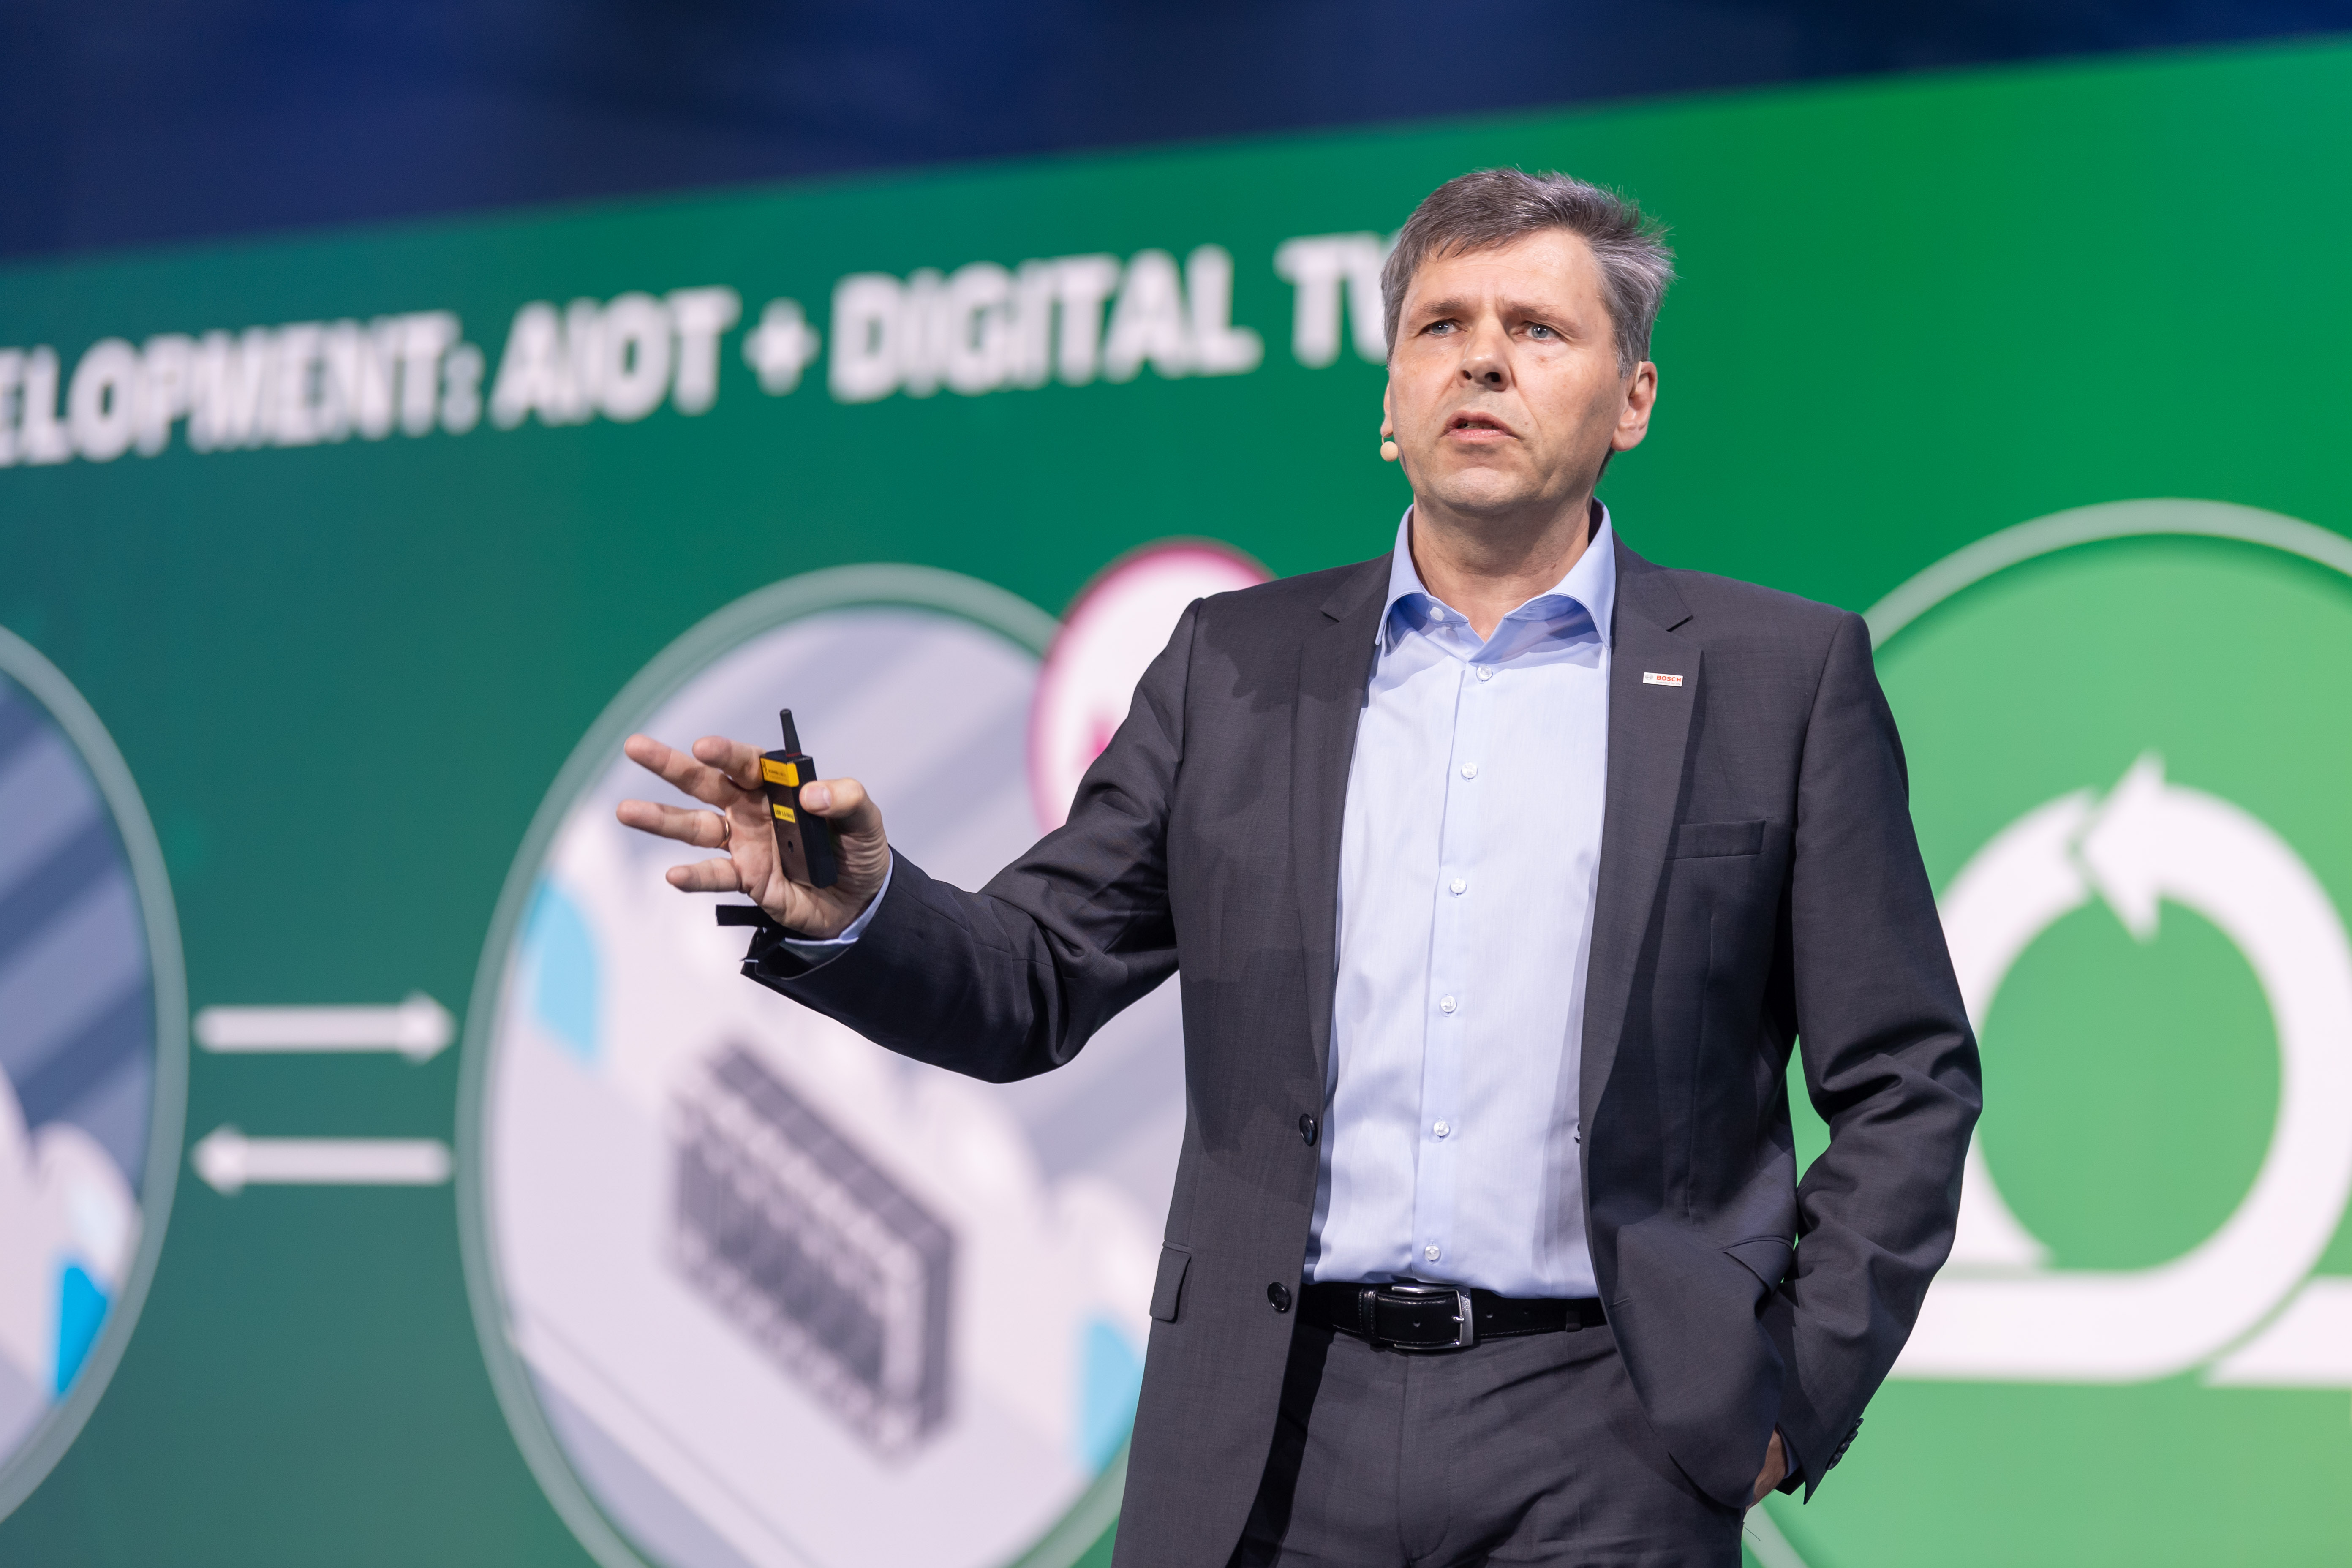 Bosch board member and CDO/CTO Dr. Michael Bolle on stage at the Bosch Connected World 2020 in Berlin.